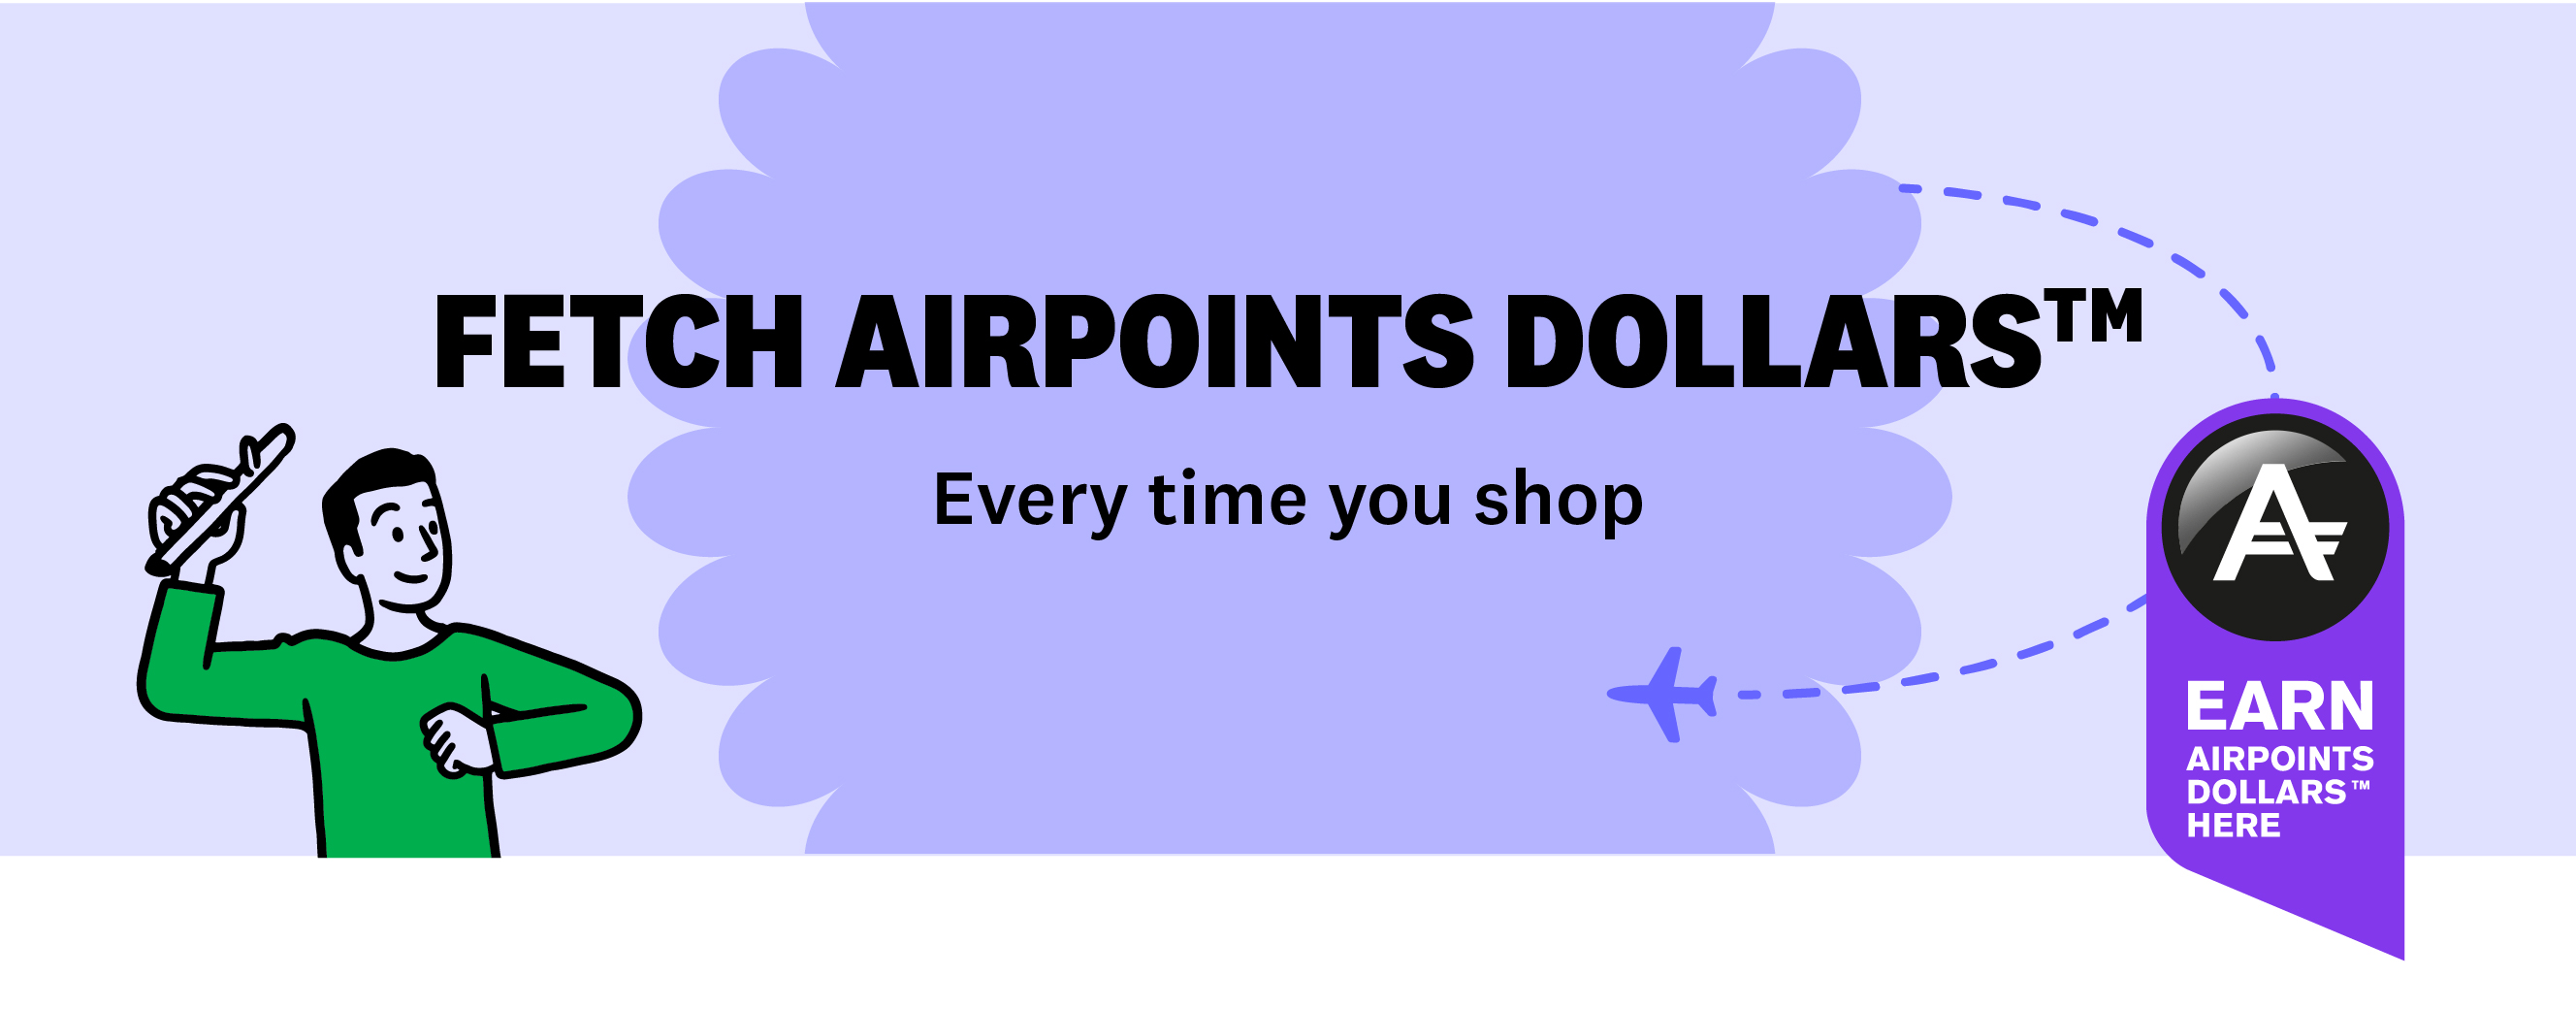 PetDirect  Airpoints